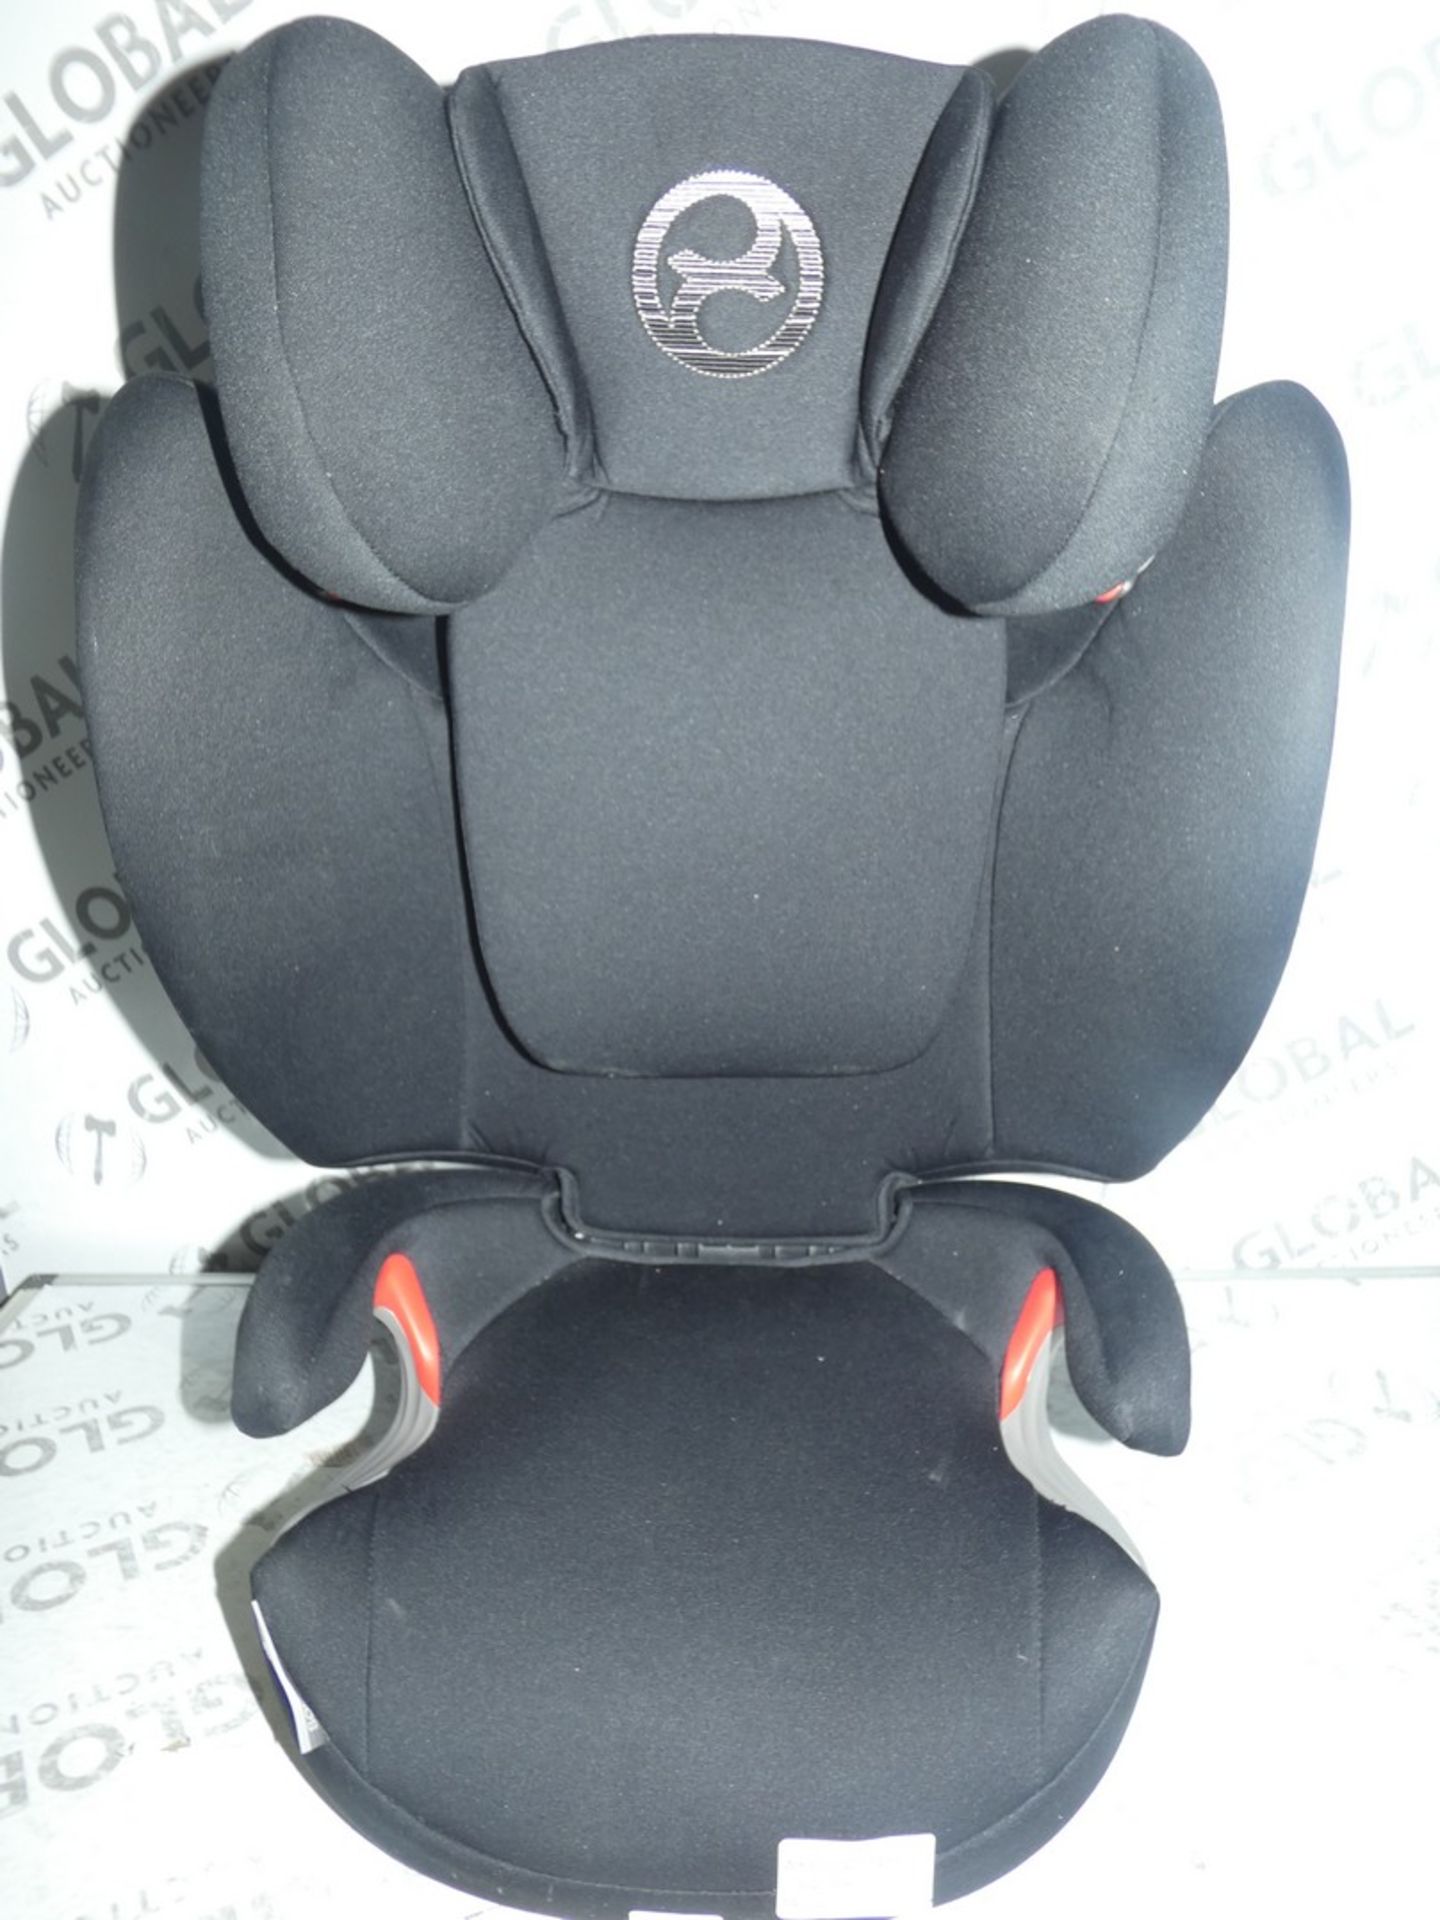 Solution Cybex In Car Children's Booster Safety Seat RRP £160 (RET00673654) (Public Viewing and